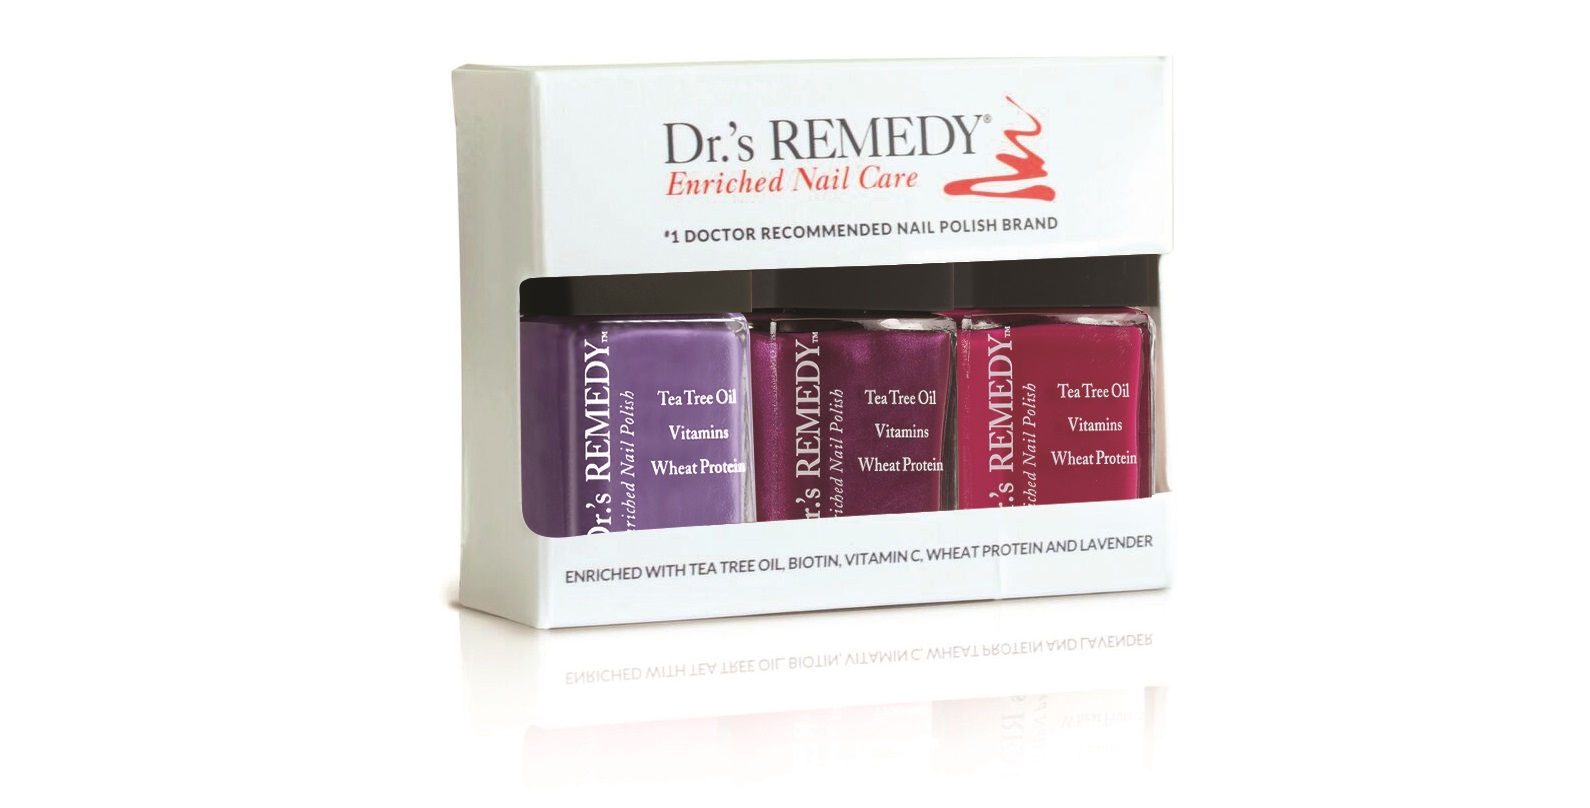 Dr.'s REMEDY Berry Fest Gift Set